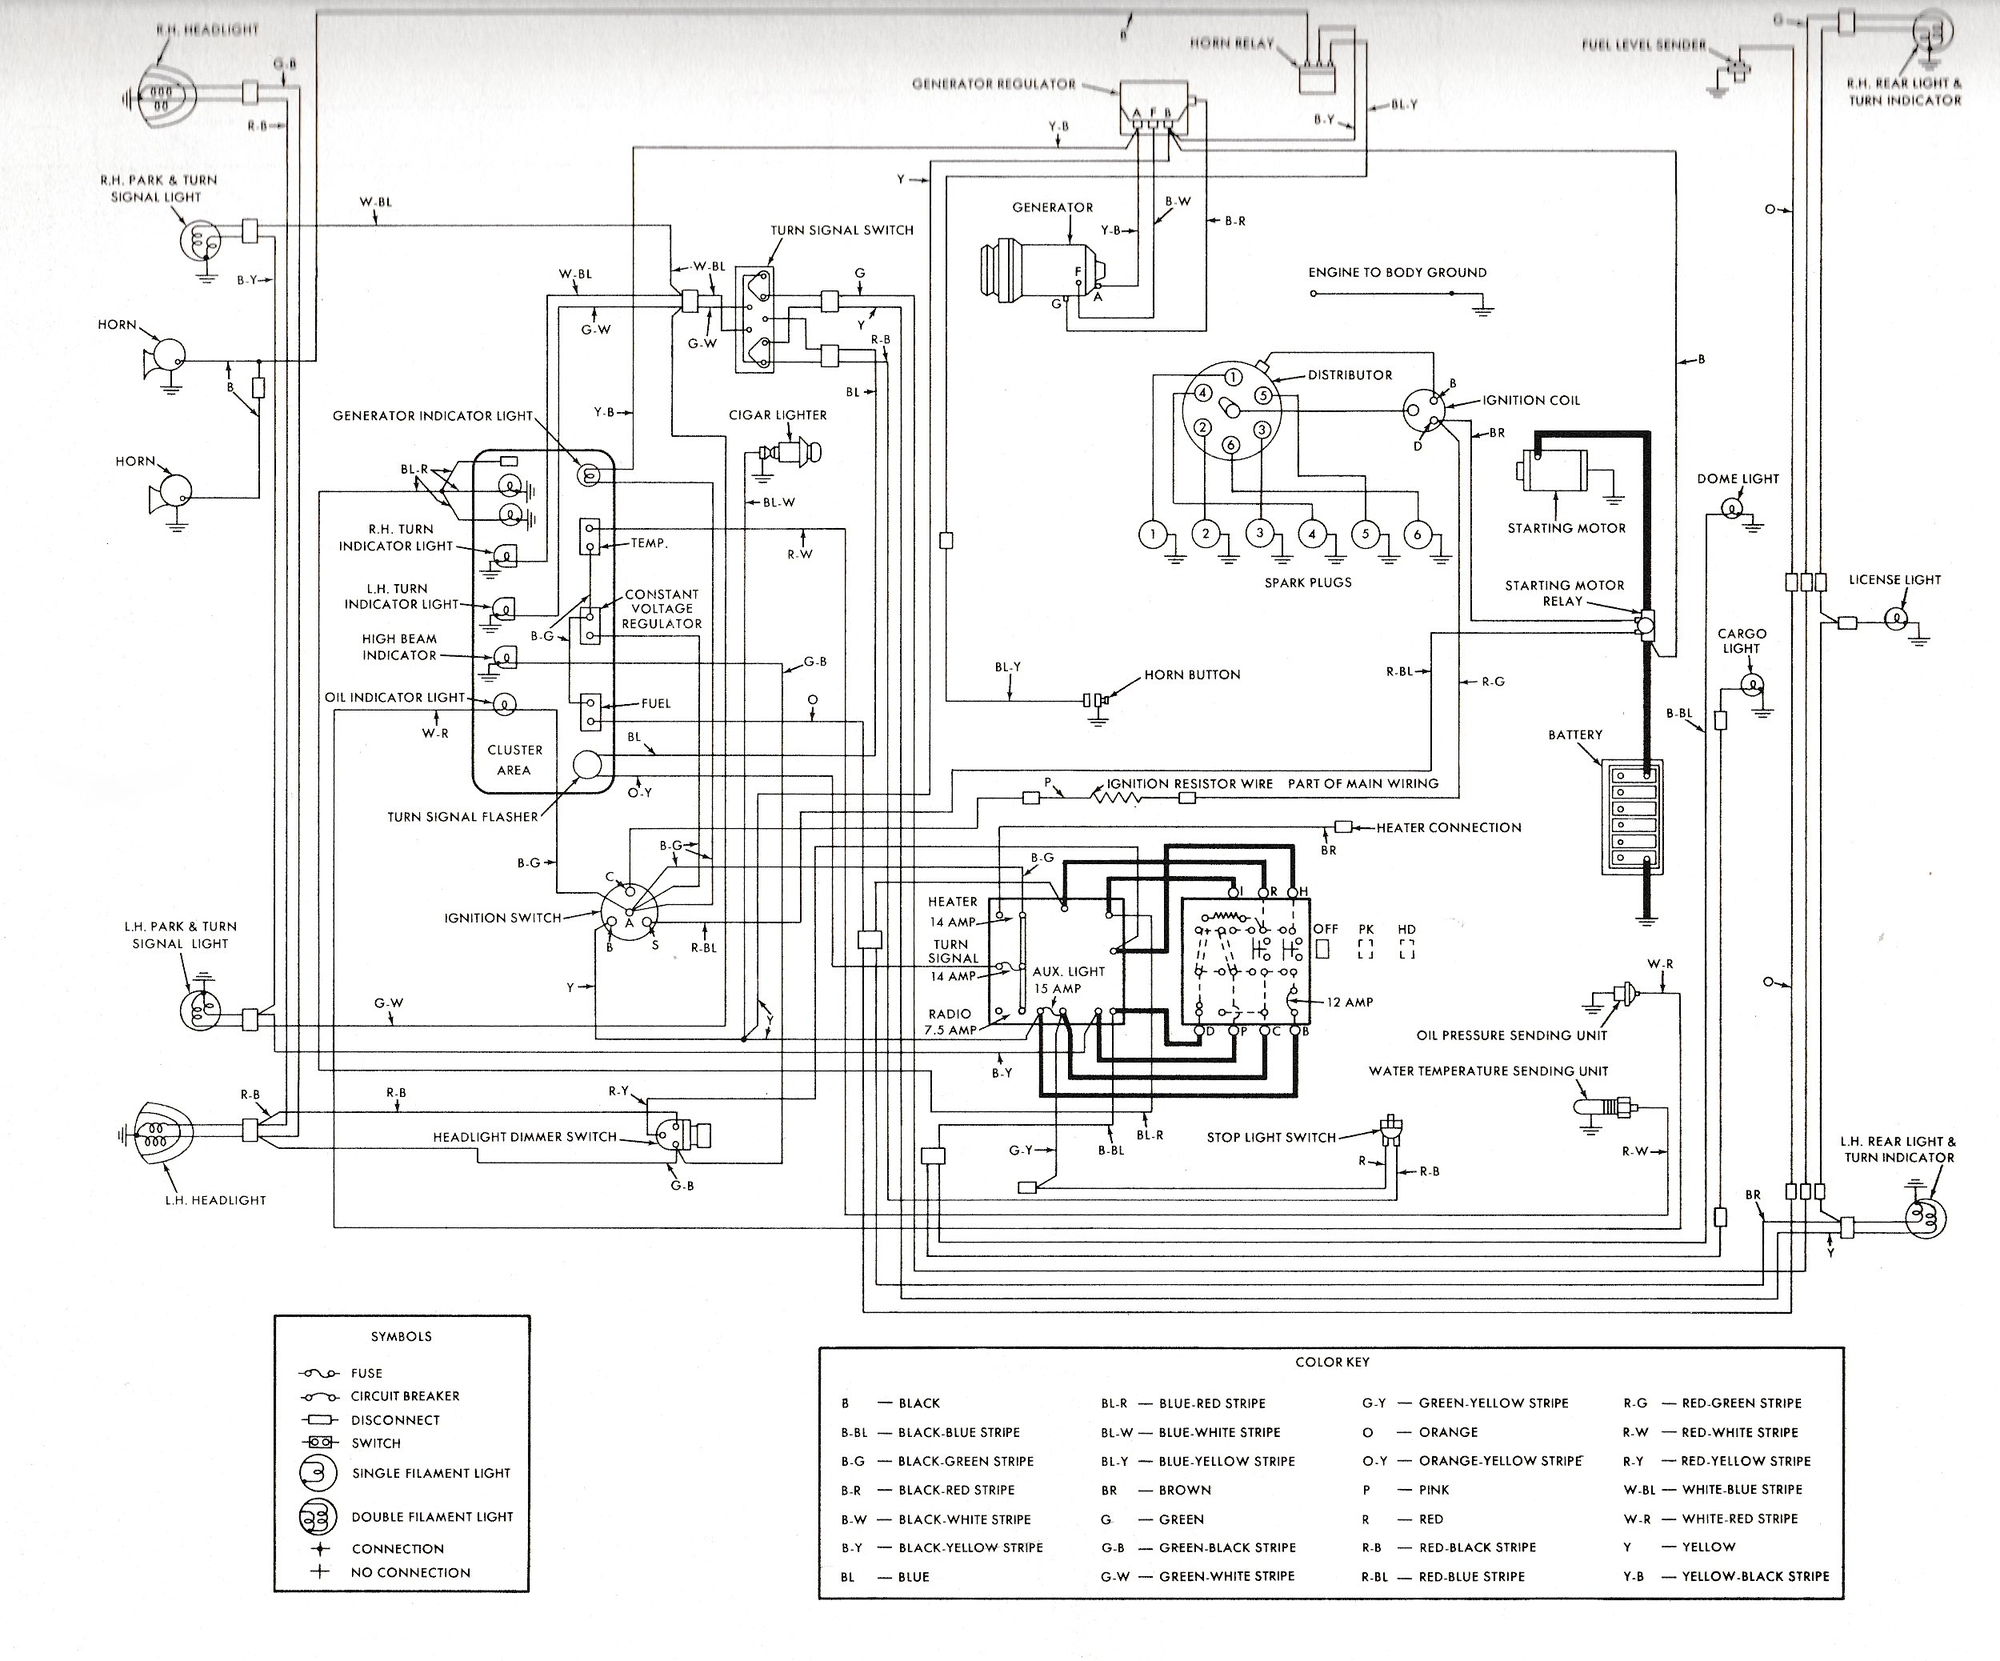 Wiring diagram - Ford Truck Enthusiasts Forums